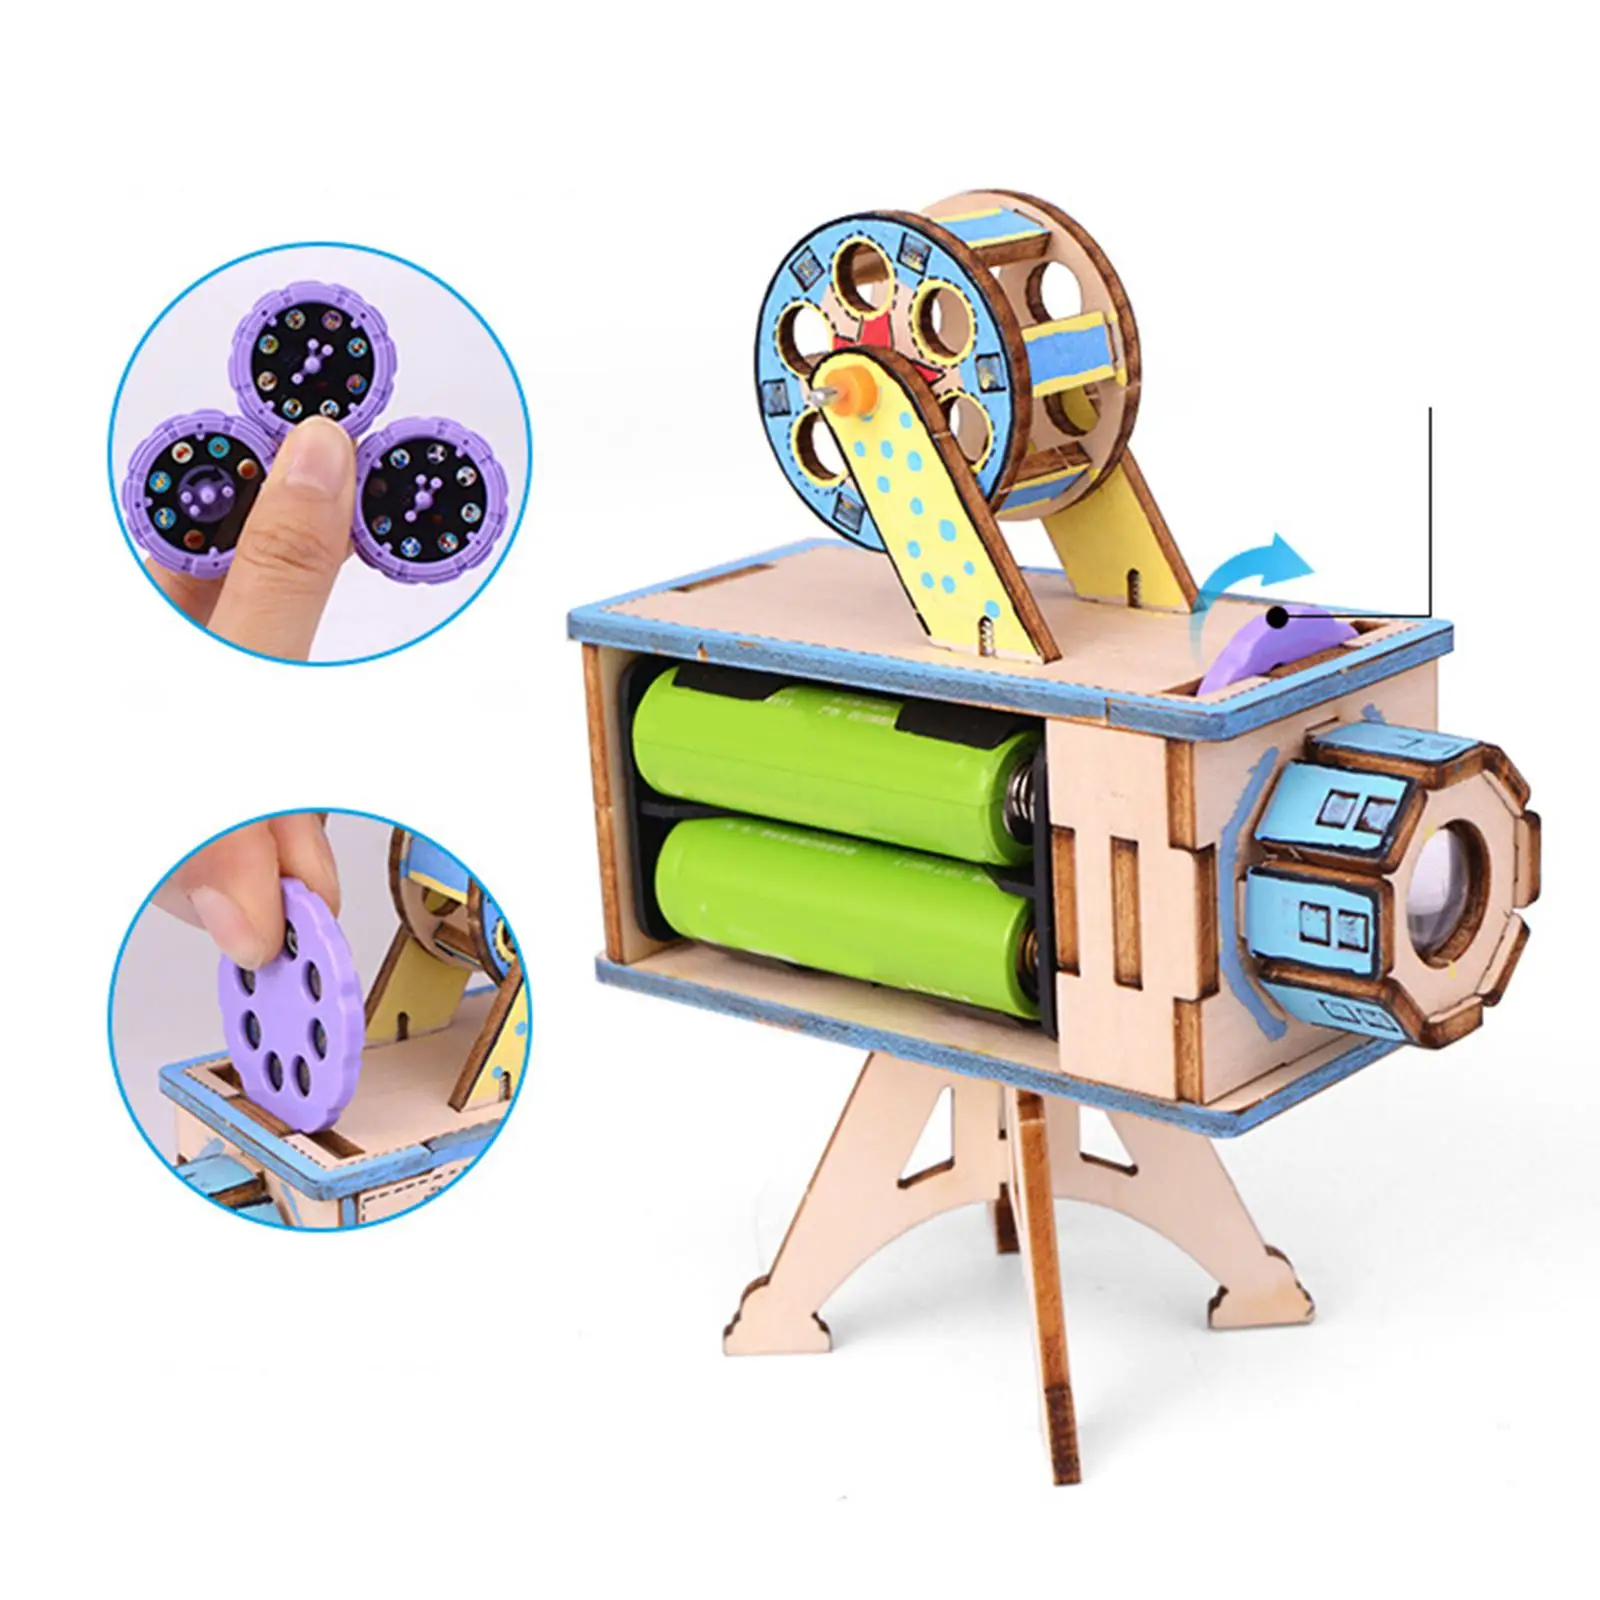 Projector Engineering Toys For Children Girls Boys Birthday Gifts